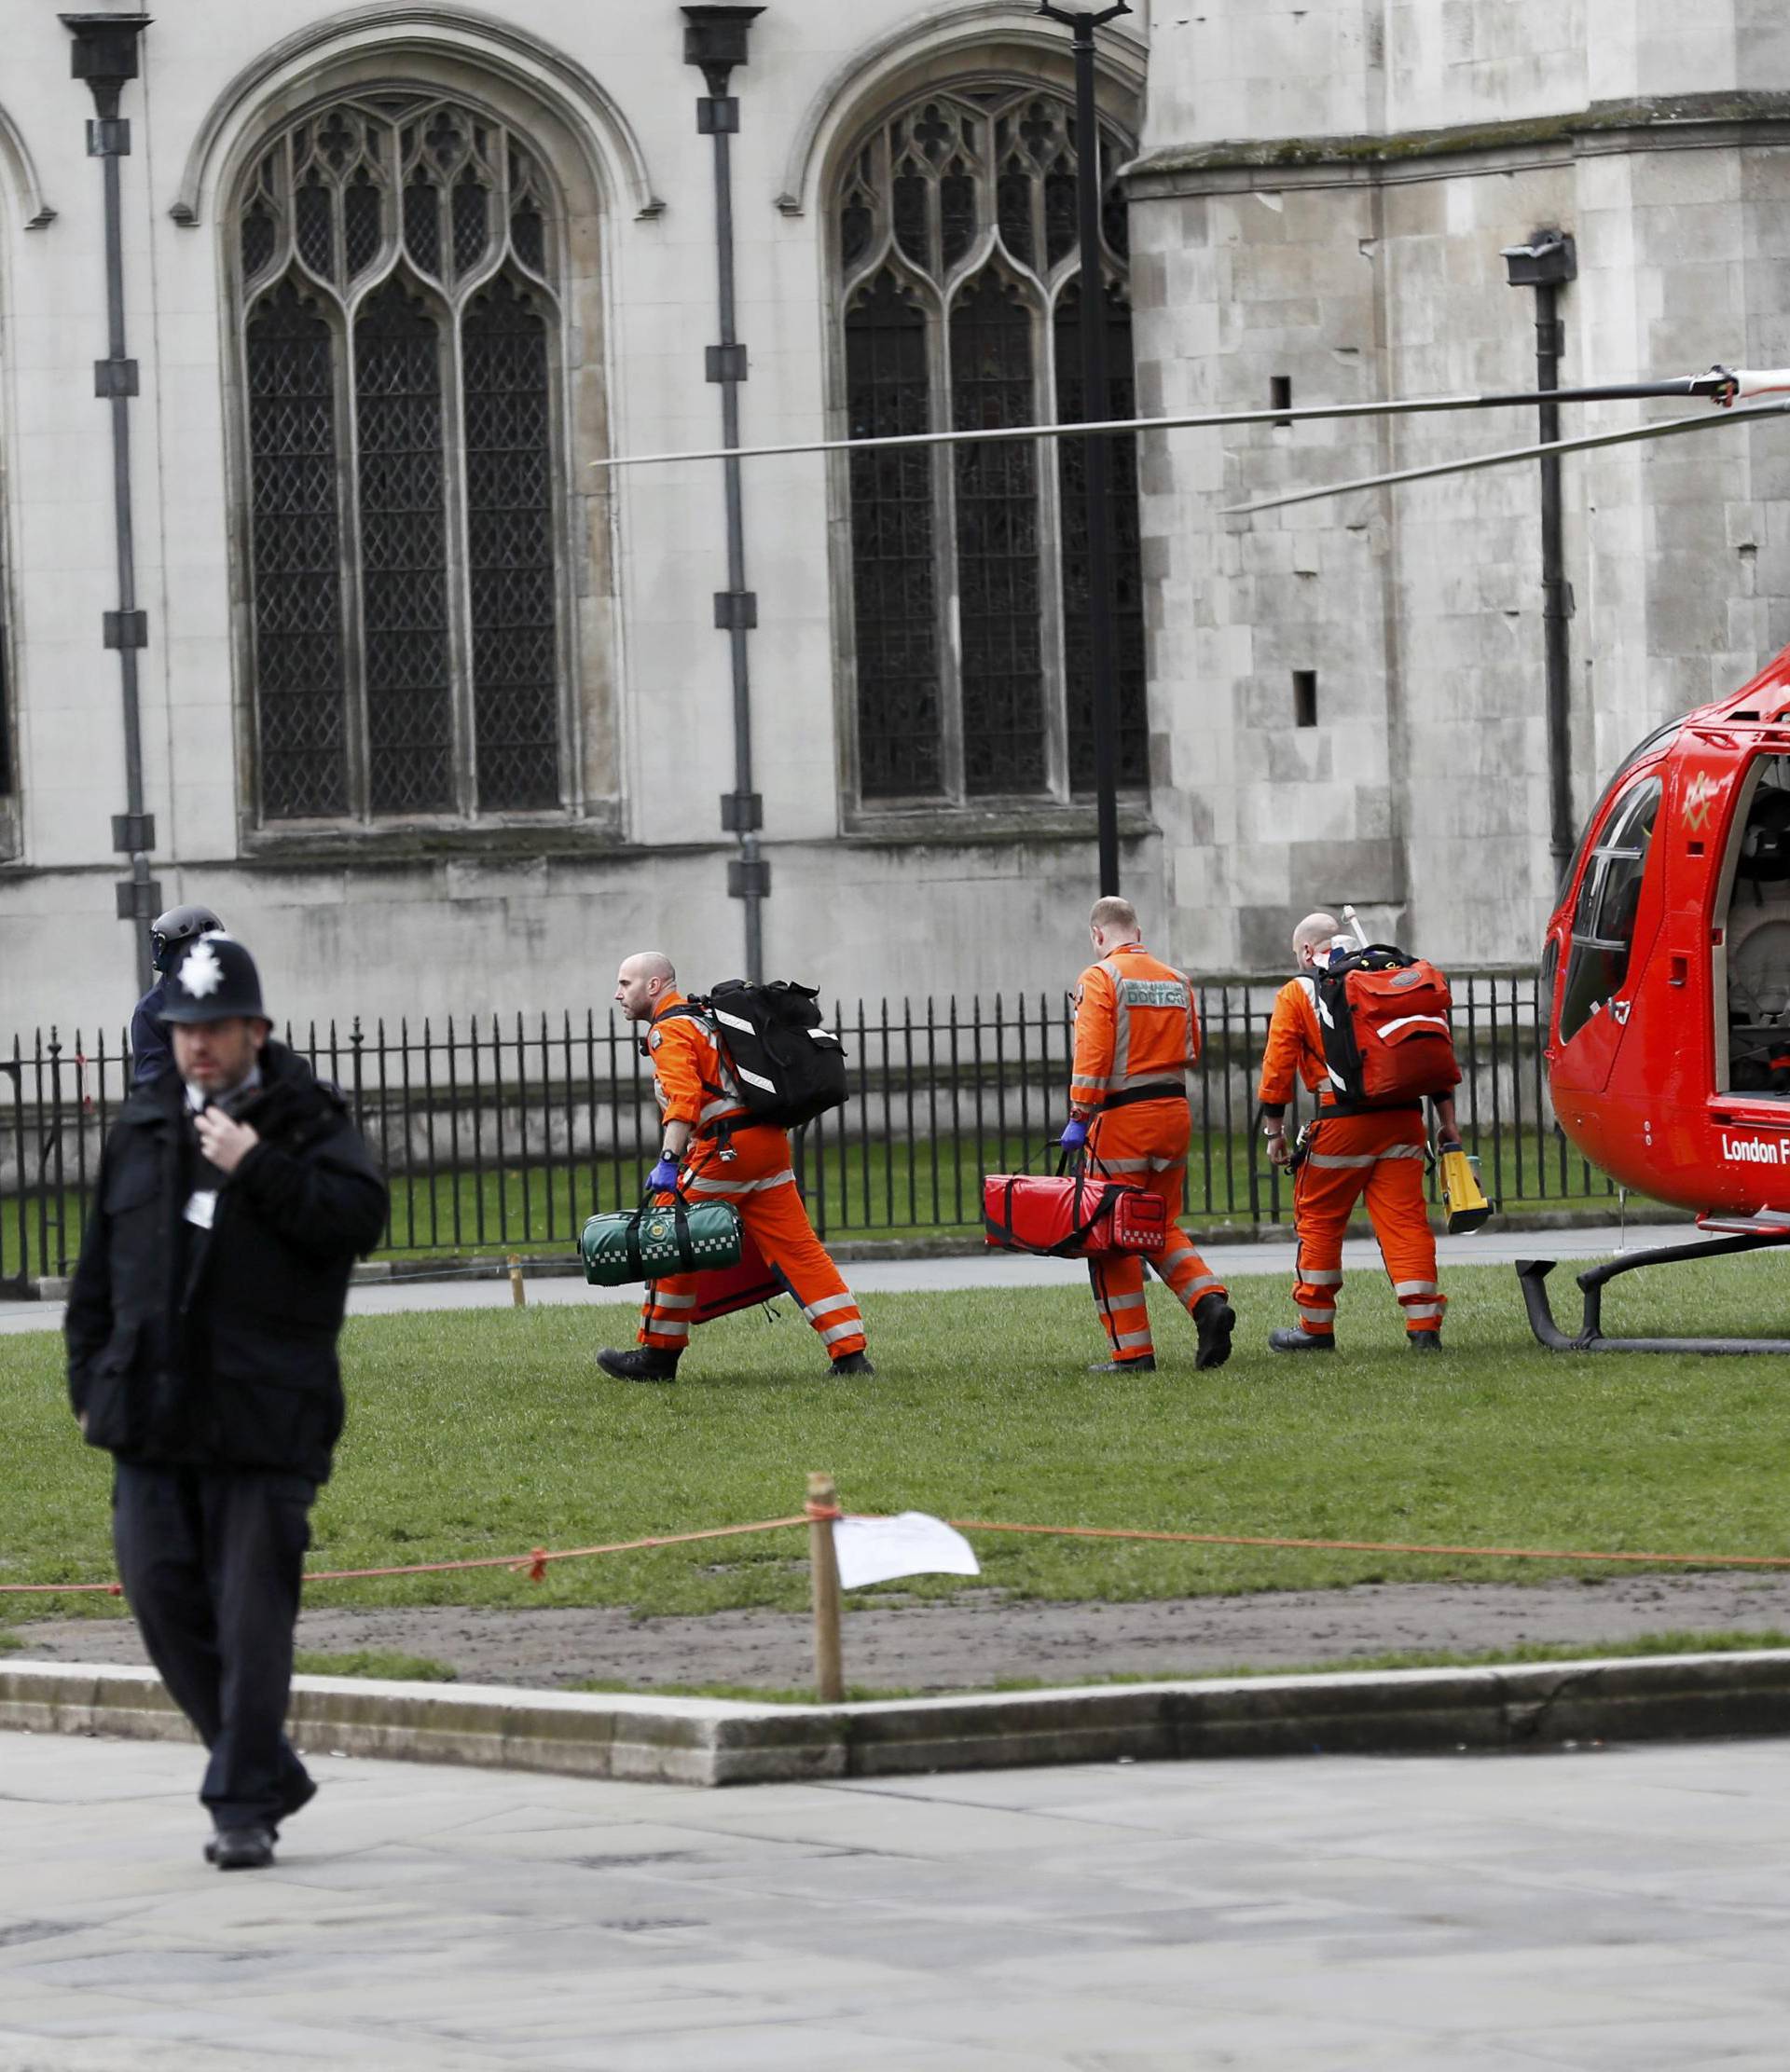 An air ambulance lands in Parliament Square during an incident on Westminster Bridge in London